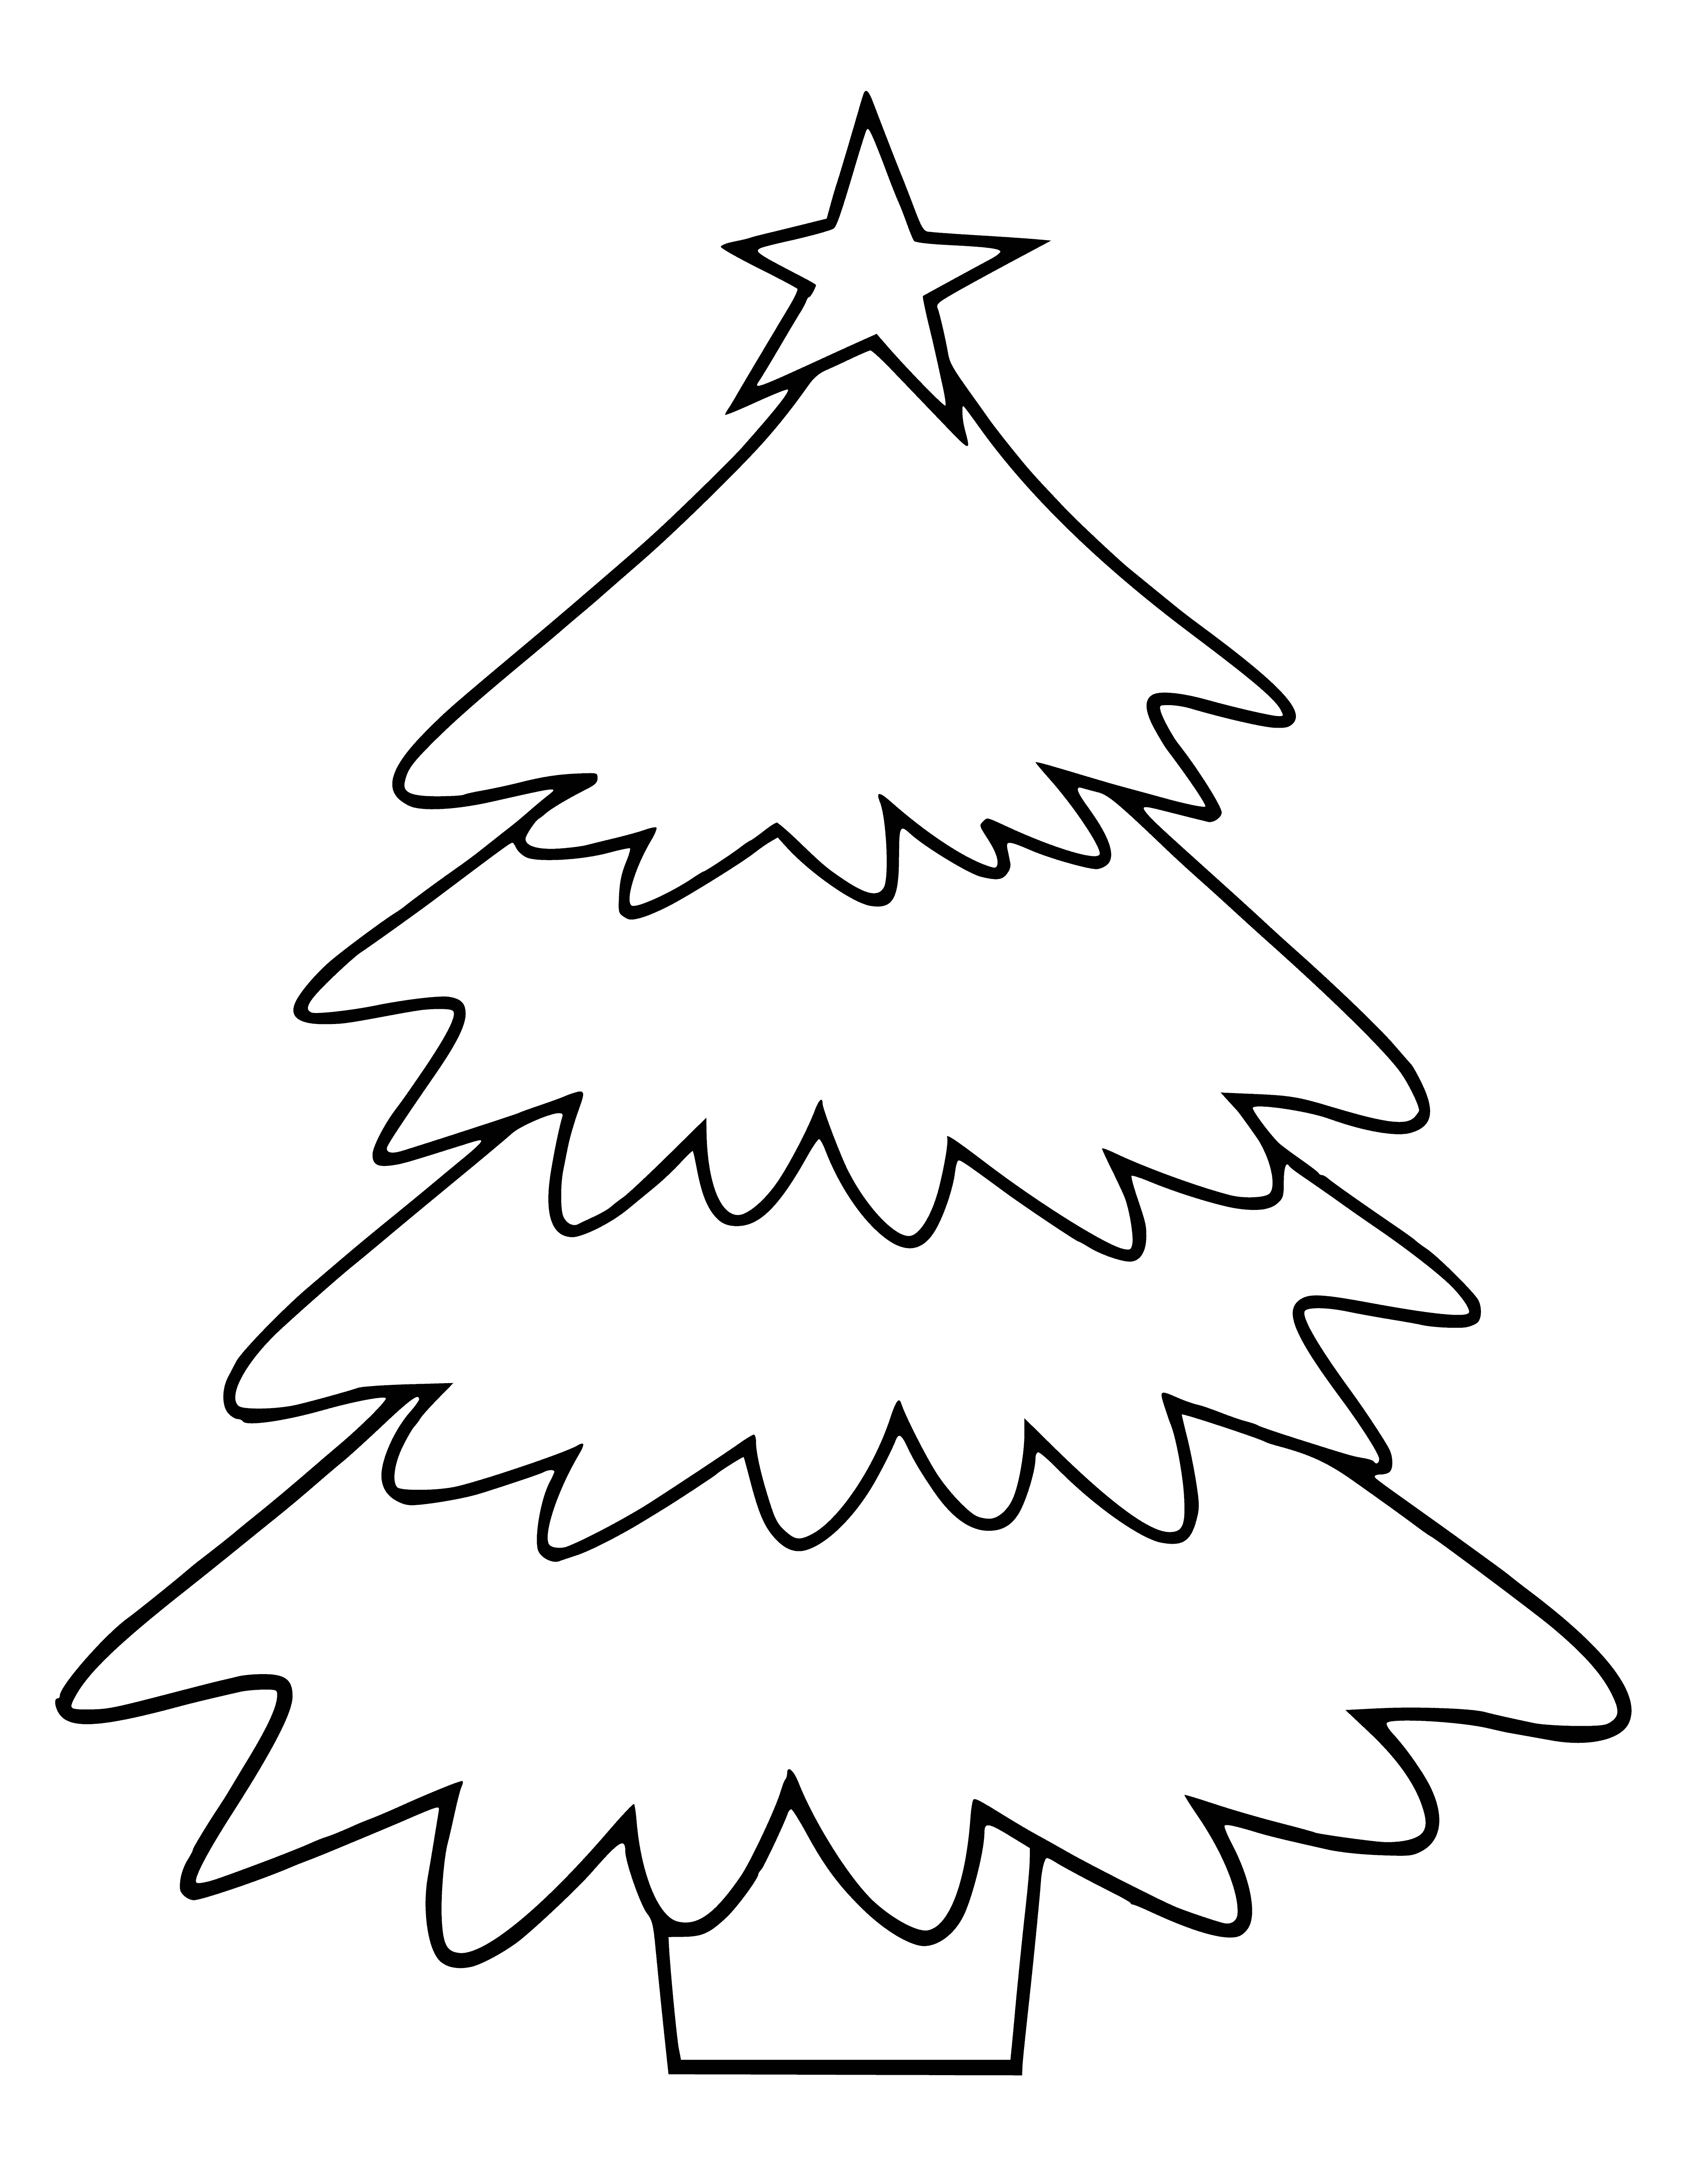 coloring page: Coloring pages of simple Christmas tree with star & gifts, fit for a festive activity! #ChristmasCrafts #ColoringPages